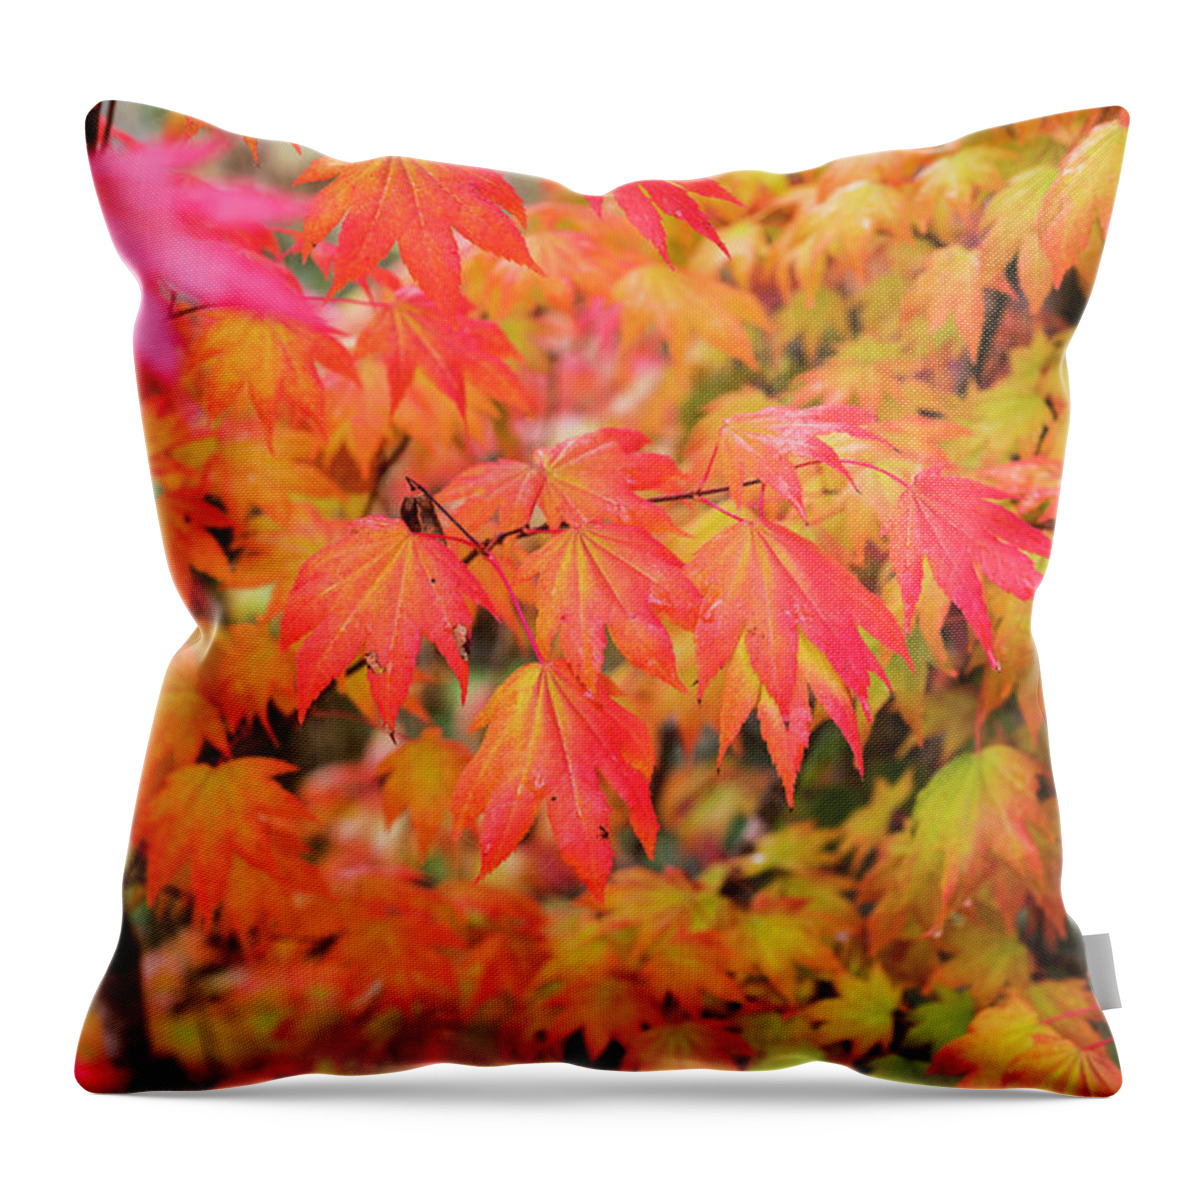 Astoria Throw Pillow featuring the photograph November Leaves by Robert Potts